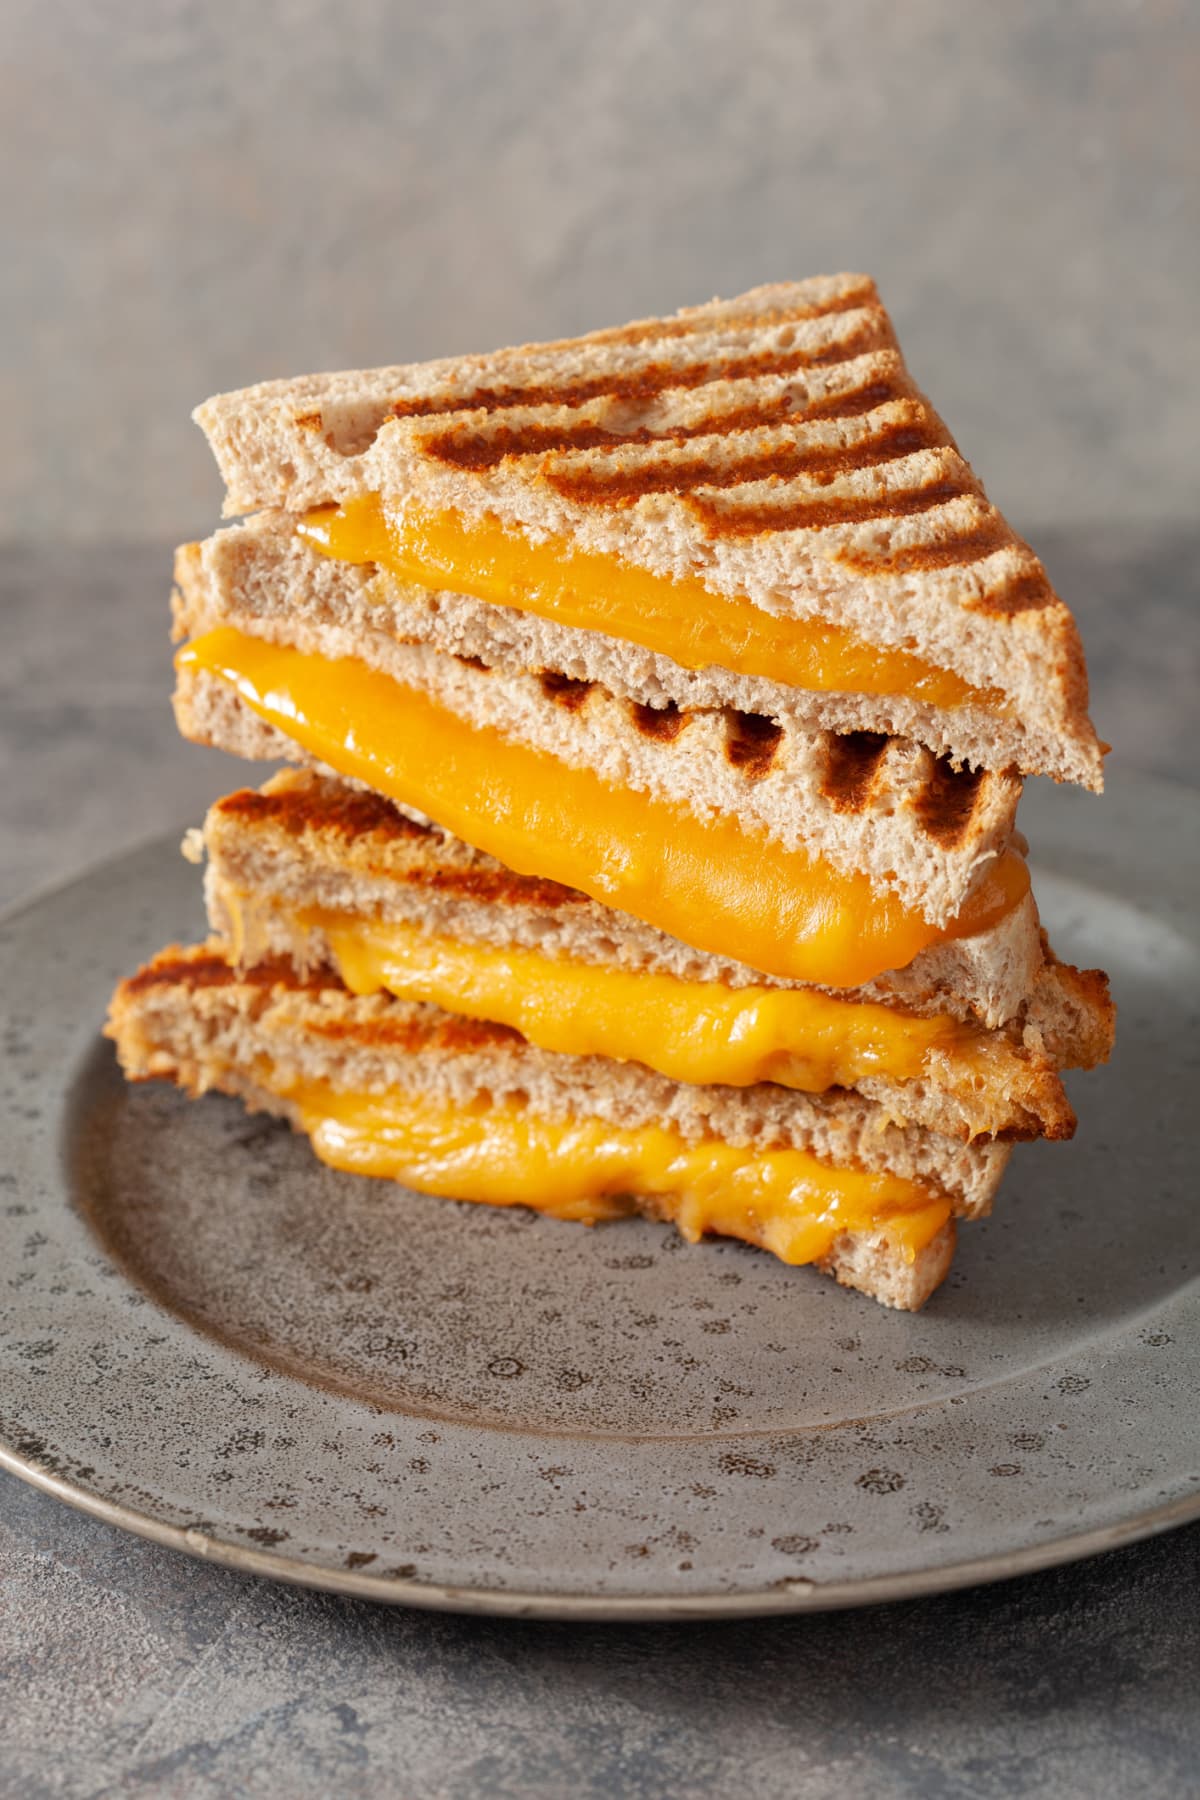 Grilled cheese sandwich on gray concrete background.